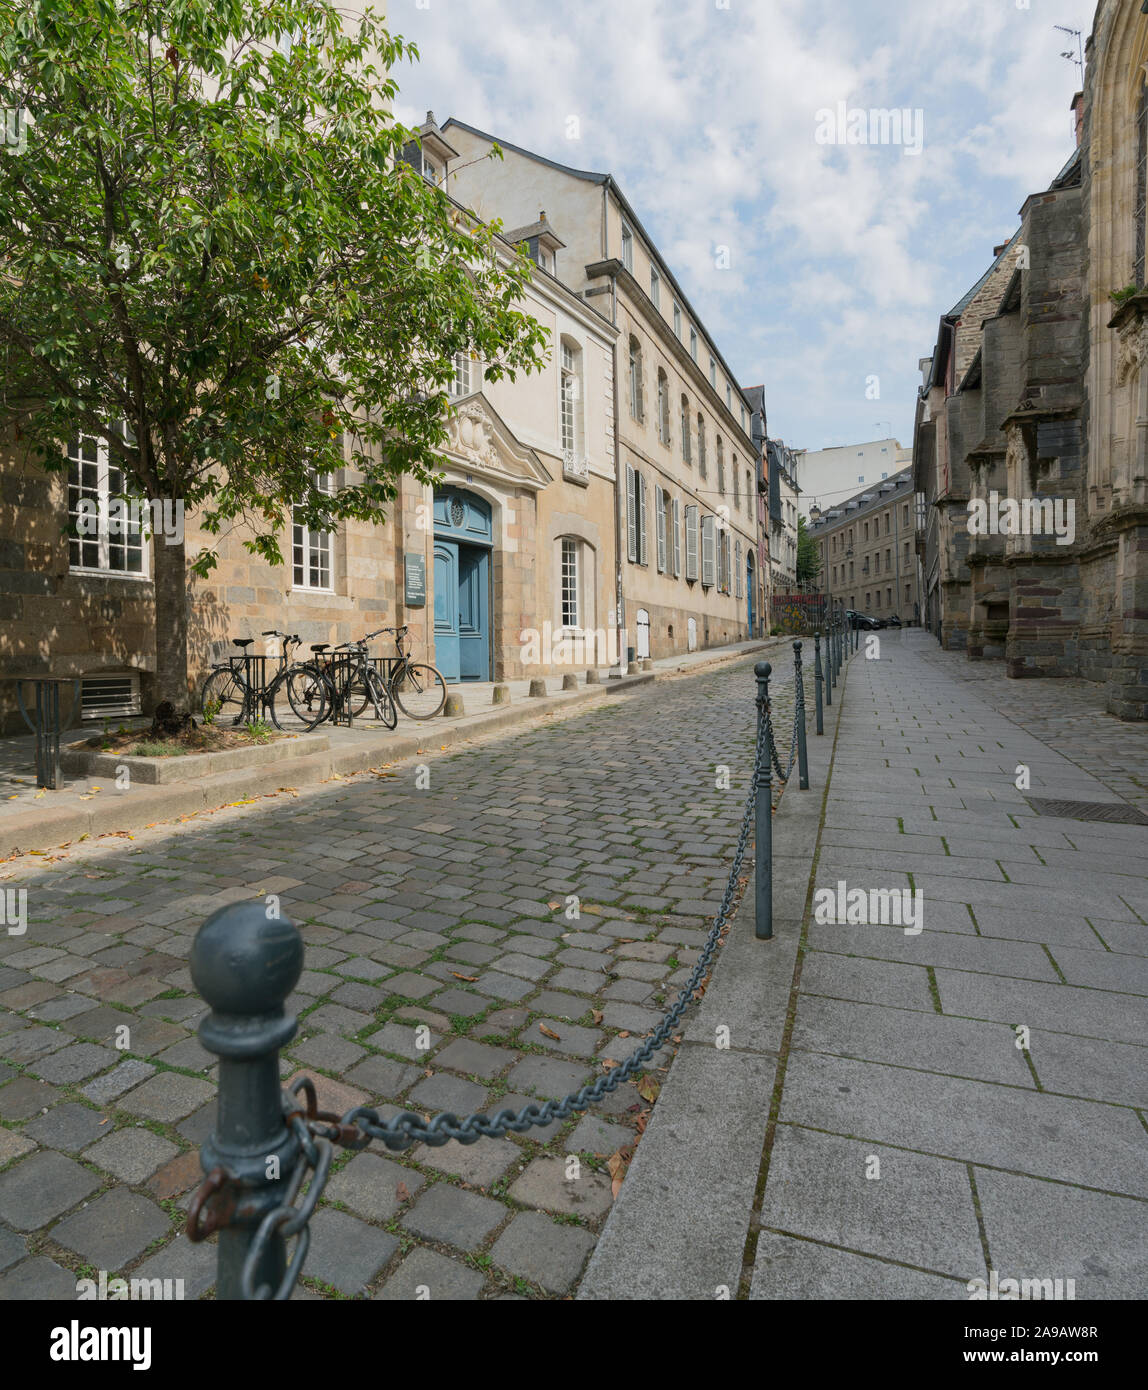 Rennes, Ille-et-Vilaine / France - 26 August 2019: the old historic city center of Rennes the capitol of Brittany Stock Photo